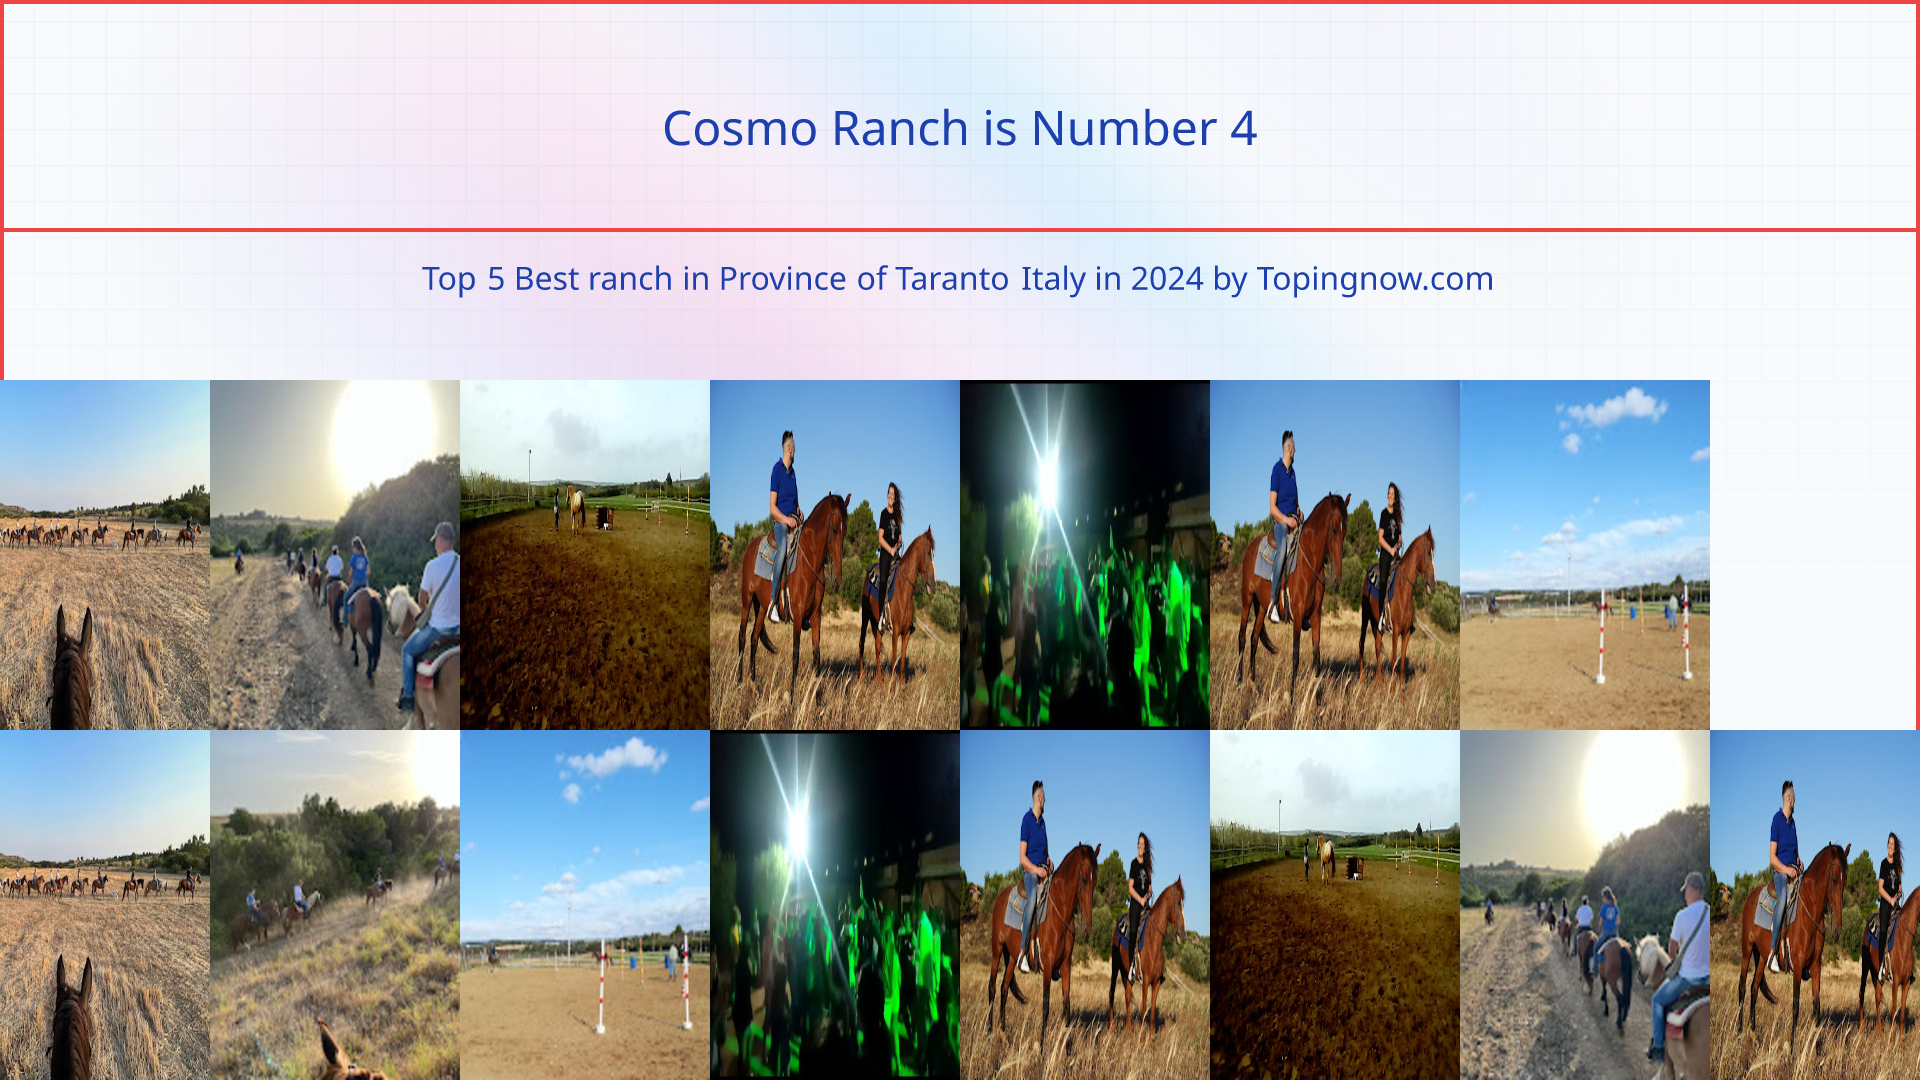 Cosmo Ranch: Top 5 Best ranch in Province of Taranto Italy in 2024